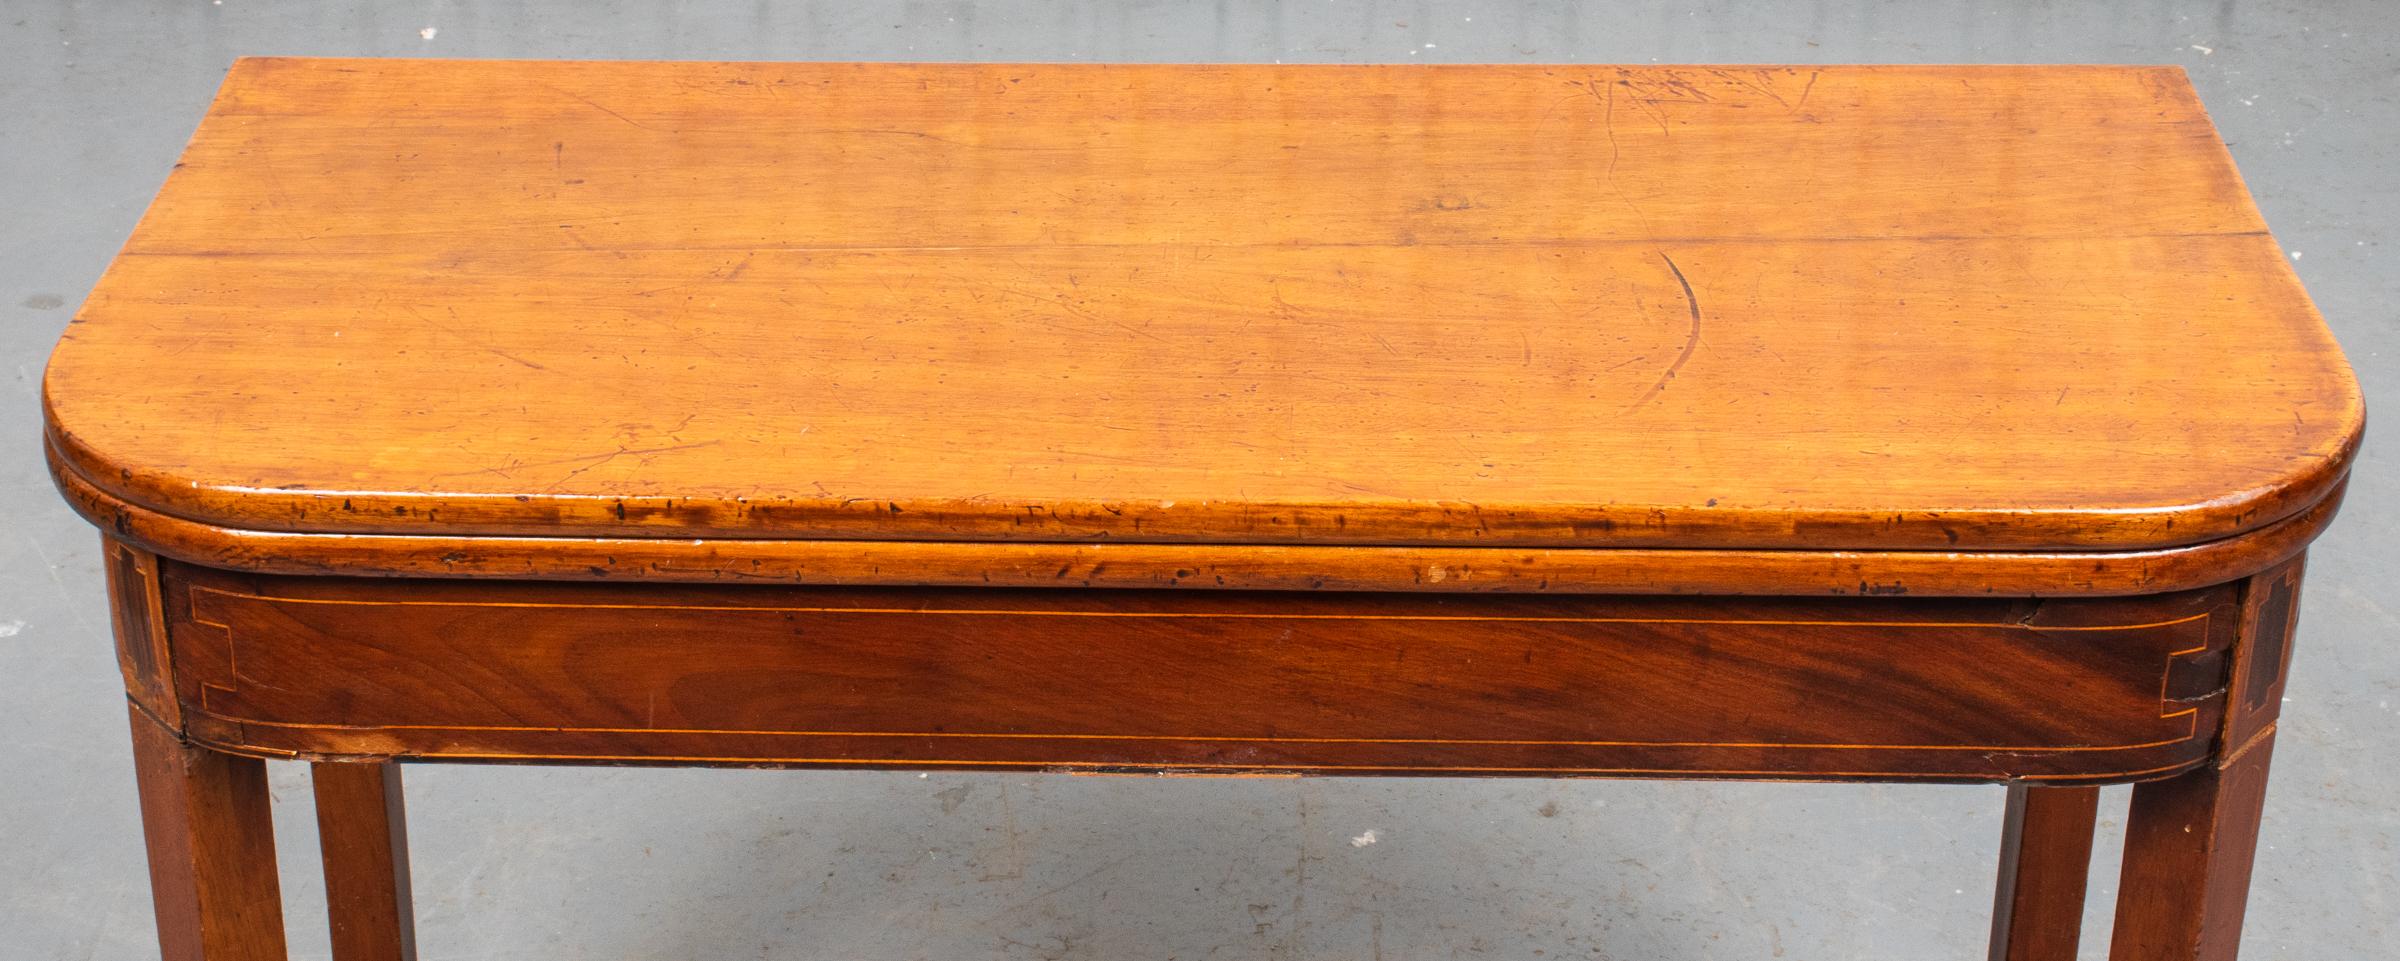 English George III Inlaid Mahogany Games Table For Sale 2